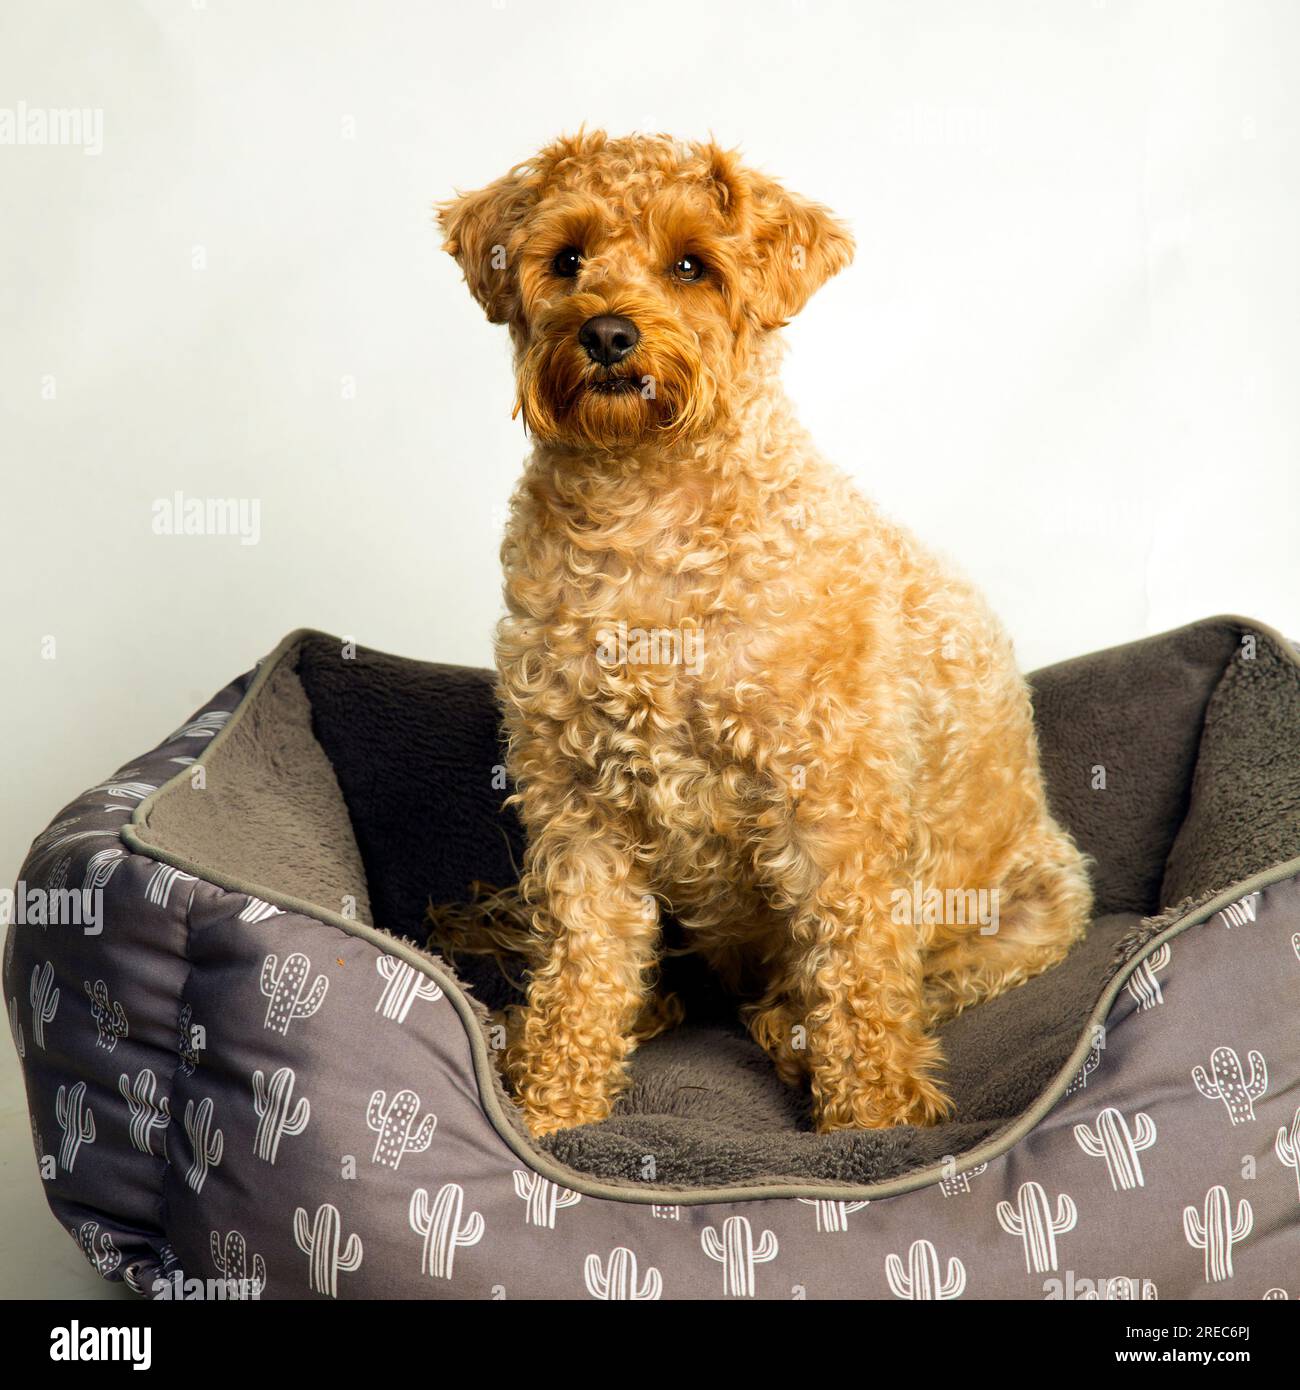 A schnoodle dog sitting in its bed Stock Photo